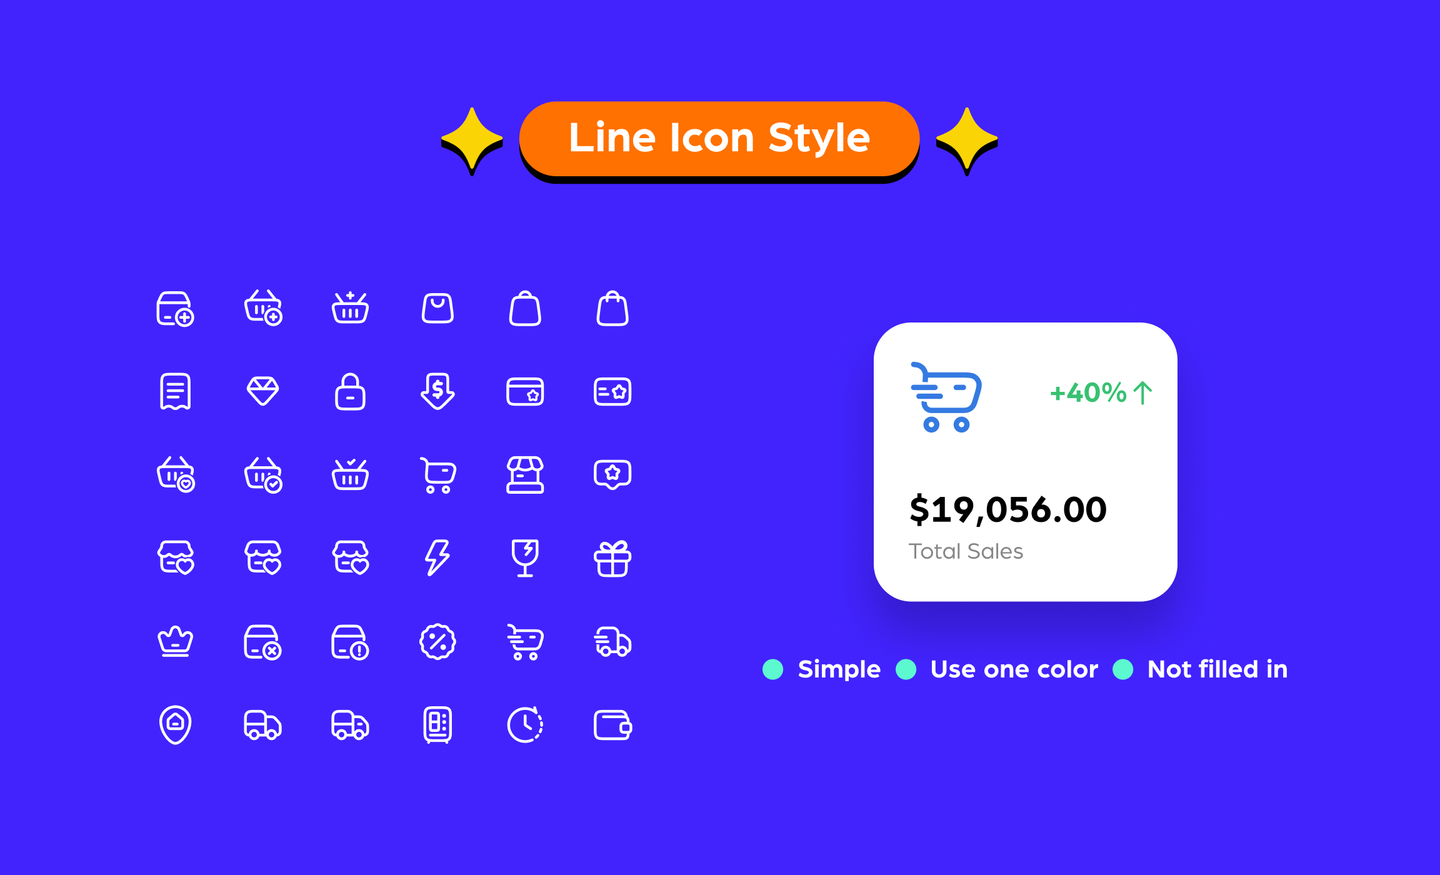 A guide to the line icon style